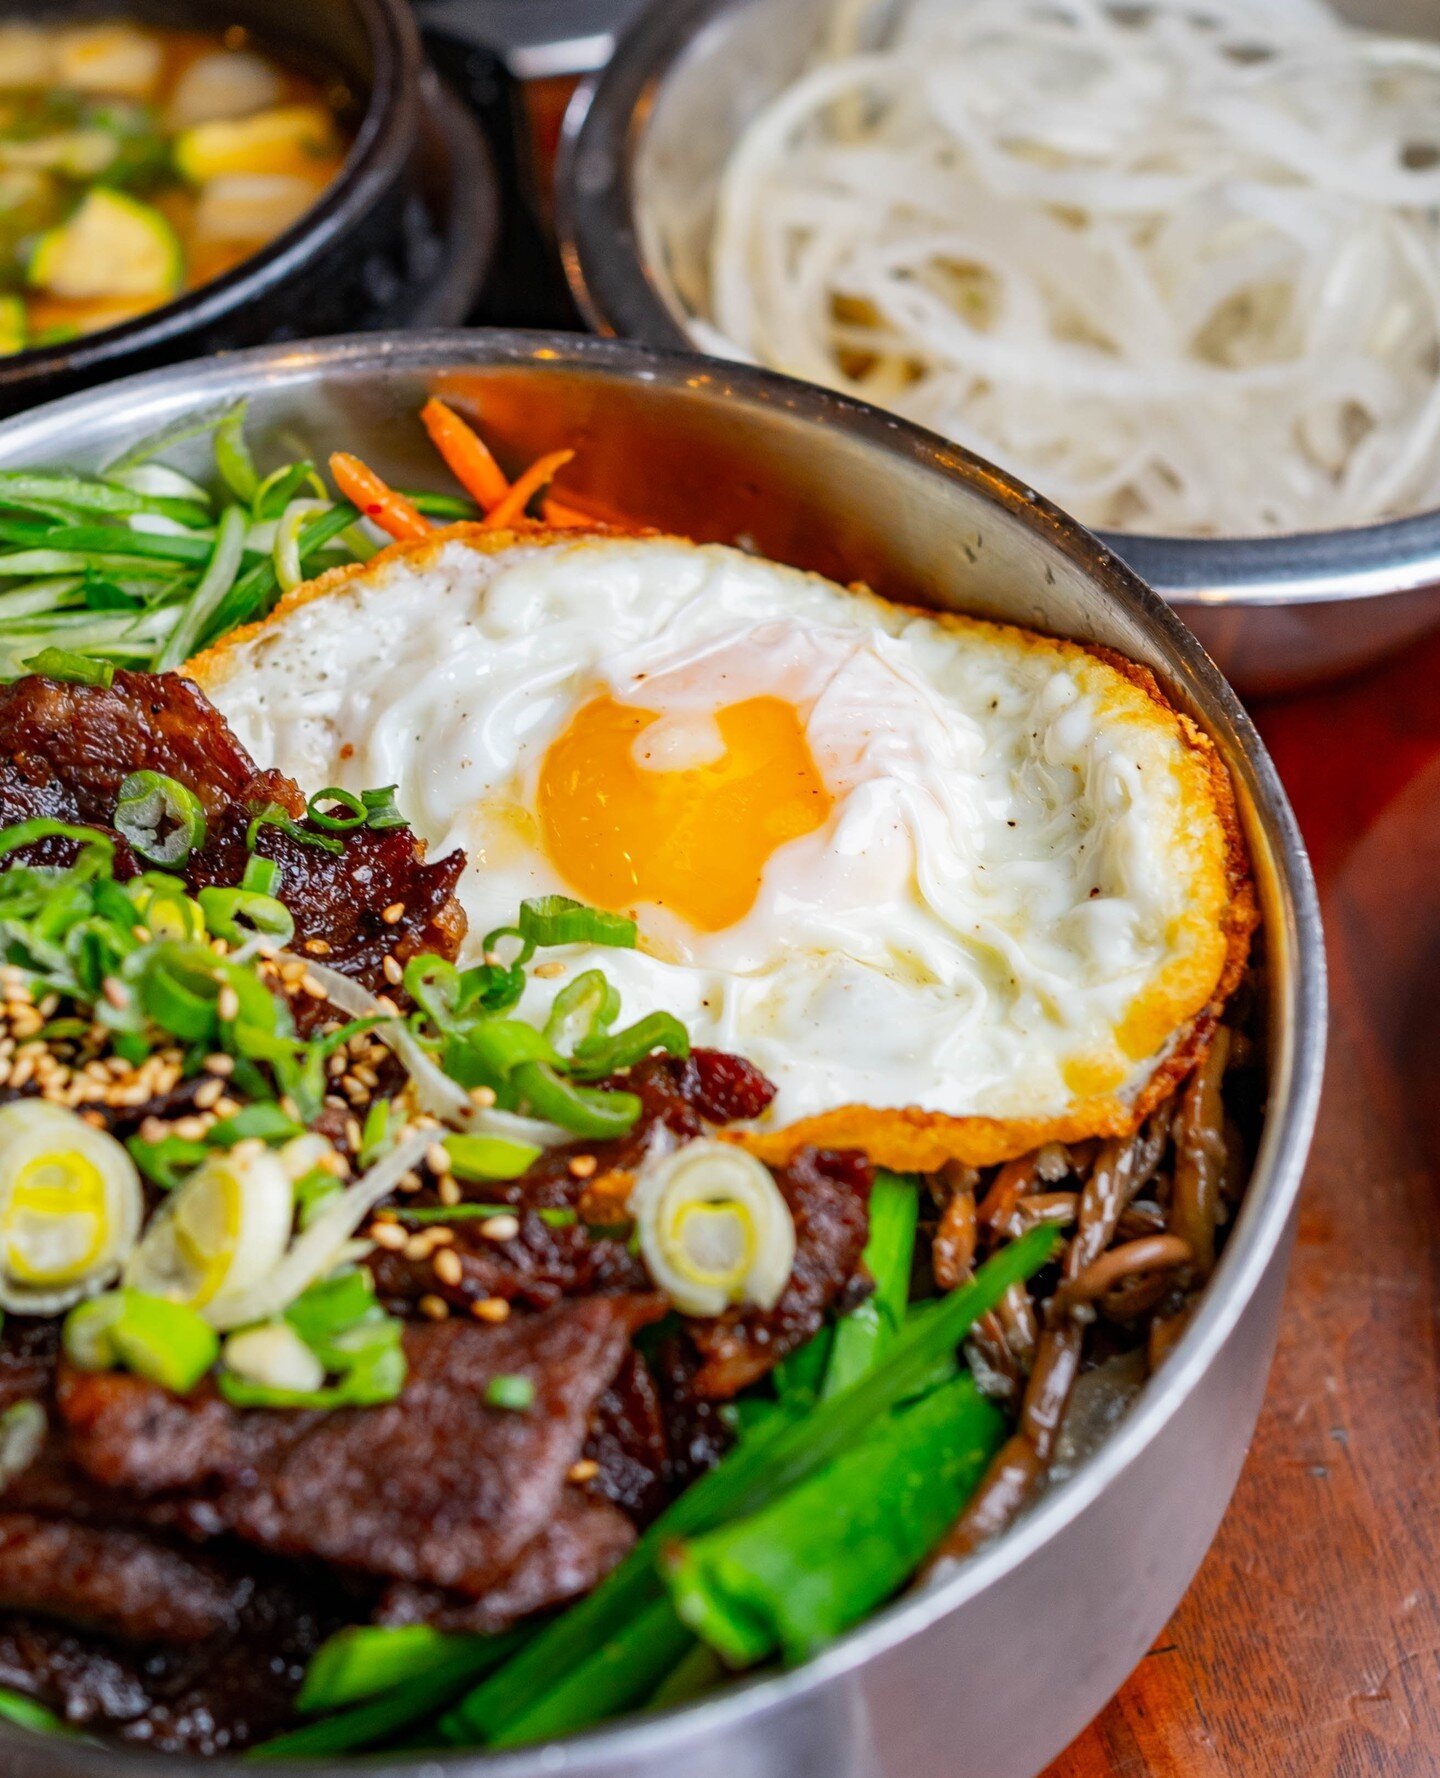 Many different Lunch Menu Items for you to try! Our San Diego location offers traditional Korean dishes to fill your tummy after a long day of work!⁠
@songhakbbq⁠
📍SongHak Korean BBQ - San Diego: 4681 Convoy St, San Diego, CA 92111⁠
.⁠
.⁠
#sdfoodie 